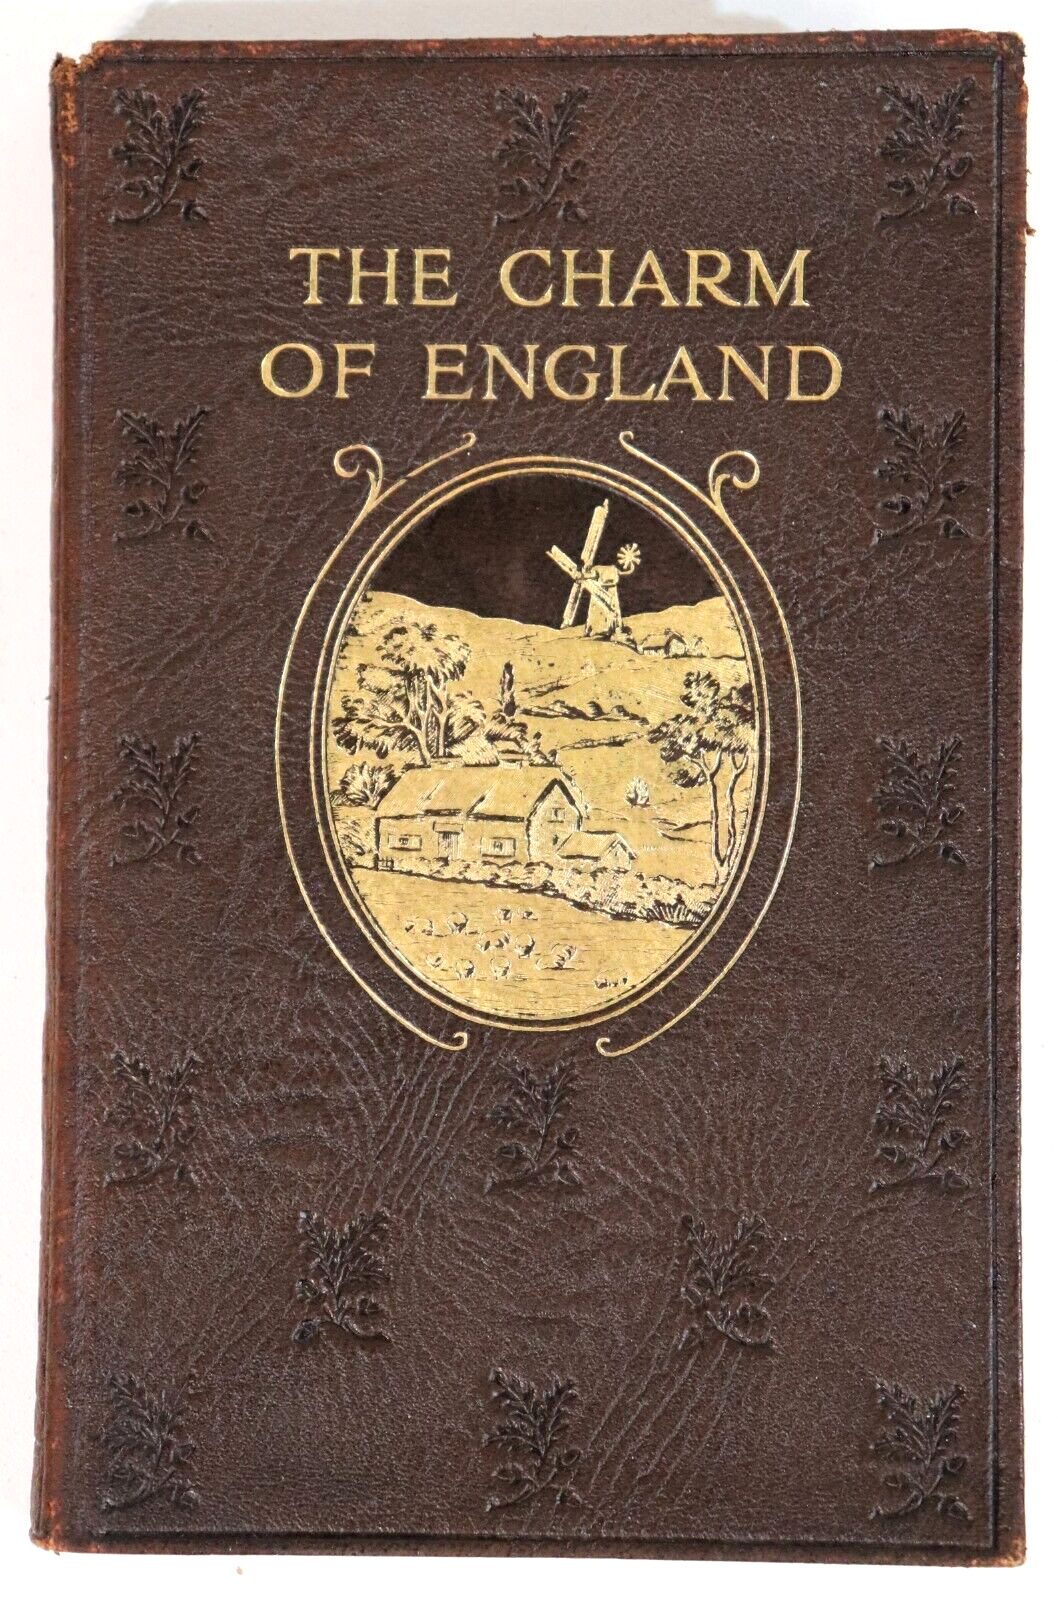 The Charm Of England by Thomas Burke - c1920 - Antique British History Book